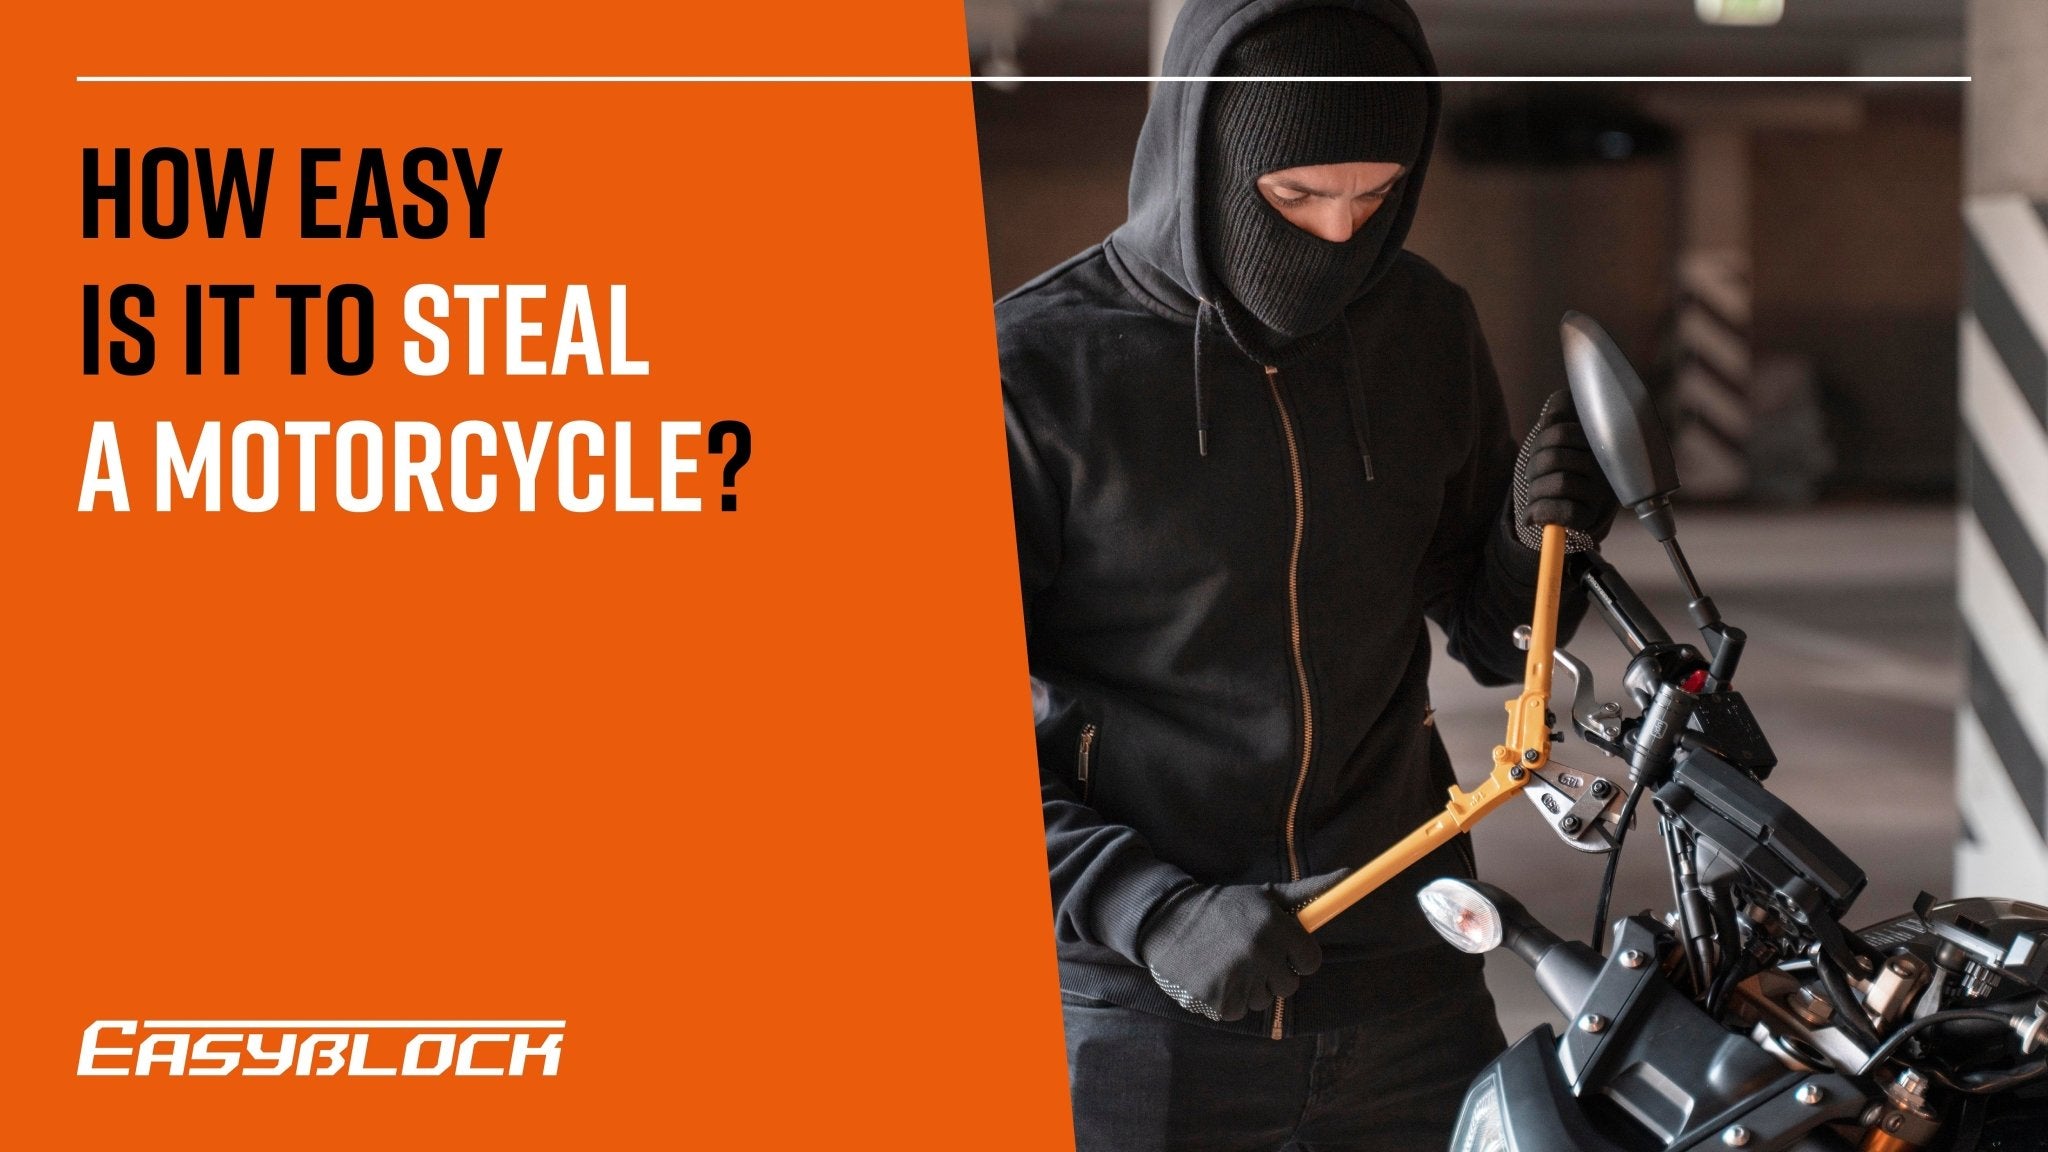 How Easy Is it to Steal a Motorcycle?